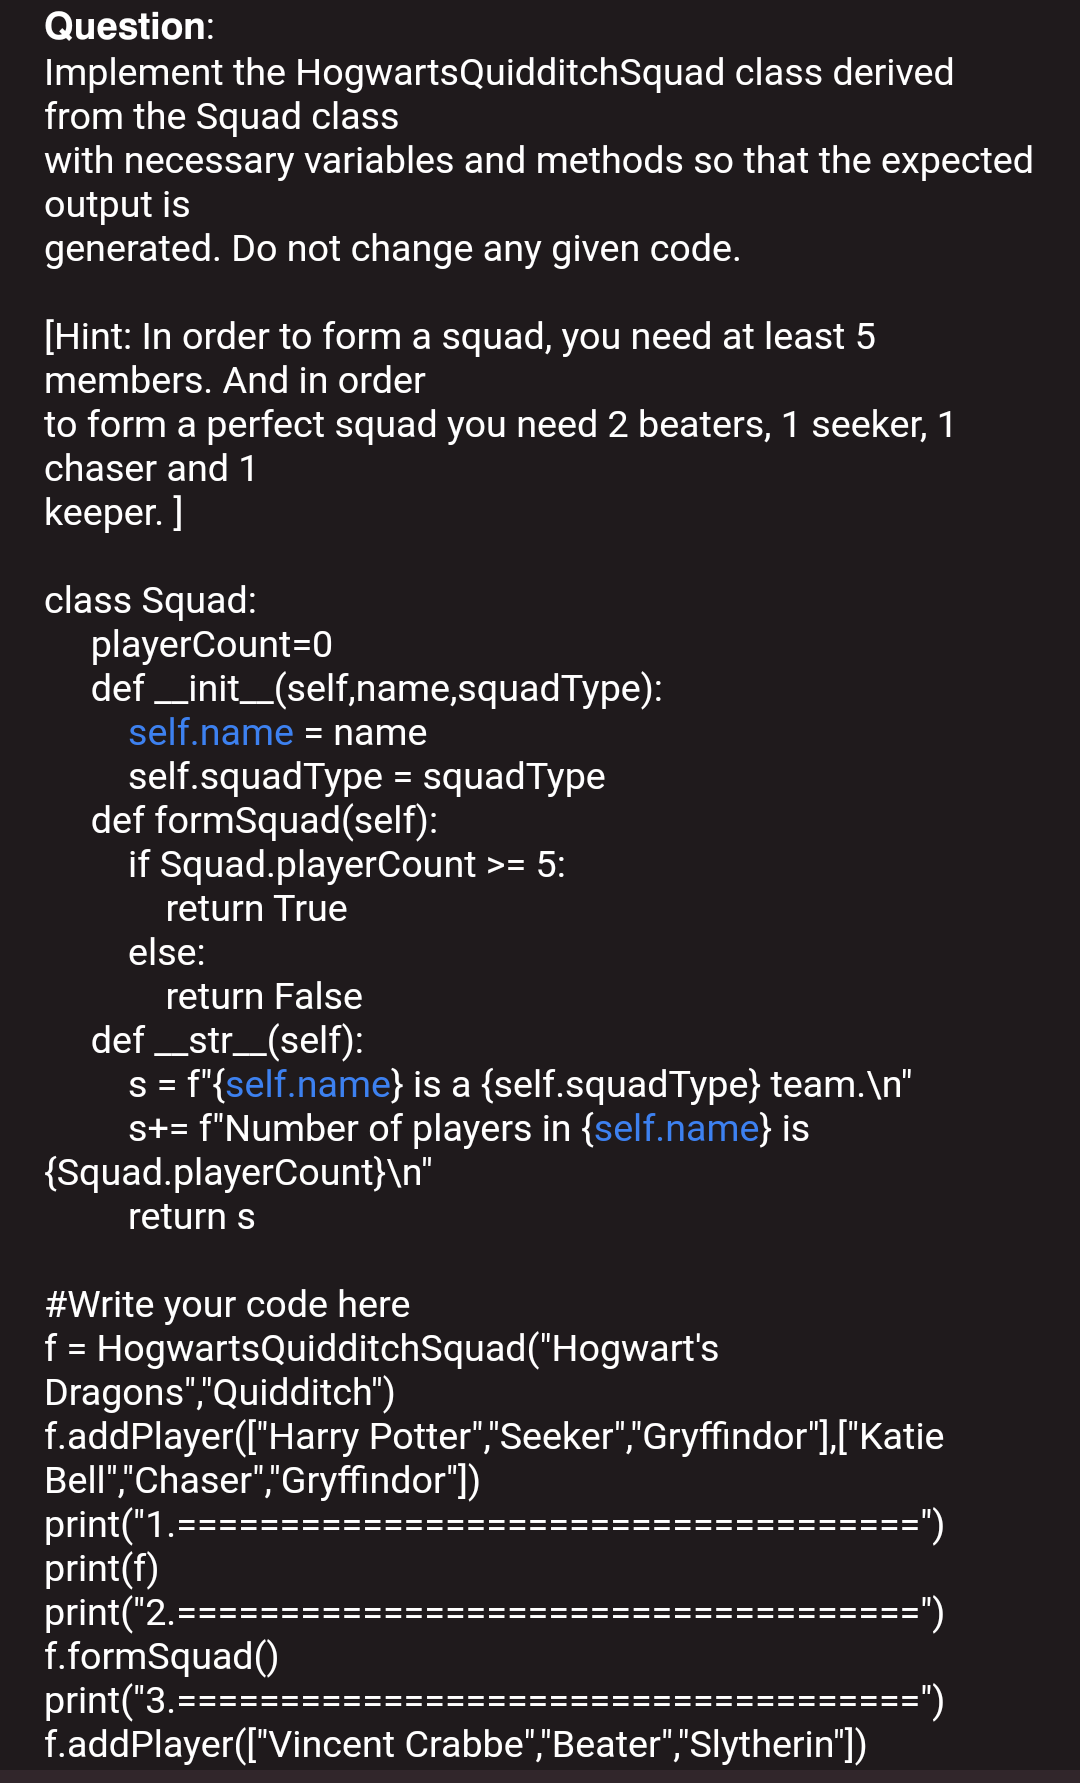 Question:
Implement the HogwartsQuidditchSquad class derived
from the Squad class
with necessary variables and methods so that the expected
output is
generated. Do not change any given code.
[Hint: In order to form a squad, you need at least 5
members. And in order
to form a perfect squad you need 2 beaters, 1 seeker, 1
chaser and 1
keeper. ]
class Squad:
playerCount=0
def _init_(self,name,squadType):
self.name = name
self.squadType = squadType
def formSquad(self):
if Squad.playerCount >= 5:
%3D
return True
else:
return False
def _str_(self):
s = f"{self.name} is a {self.squadType} team.\n"
st= f"Number of players in {self.name} is
{Squad.playerCount}\n"
return s
#Write your code here
f = HogwartsQuidditchSquad("Hogwart's
Dragons","Quidditch")
f.addPlayer(["Harry Potter","Seeker","Gryffindor"],["Katie
Bell","Chaser","Gryffindor")
print("1.====
print(f)
print("2.-
f.formSquad()
print("3.==
f.addPlayer(["Vincent Crabbe","Beater","Slytherin')
=")
==")
:===")
IL I
